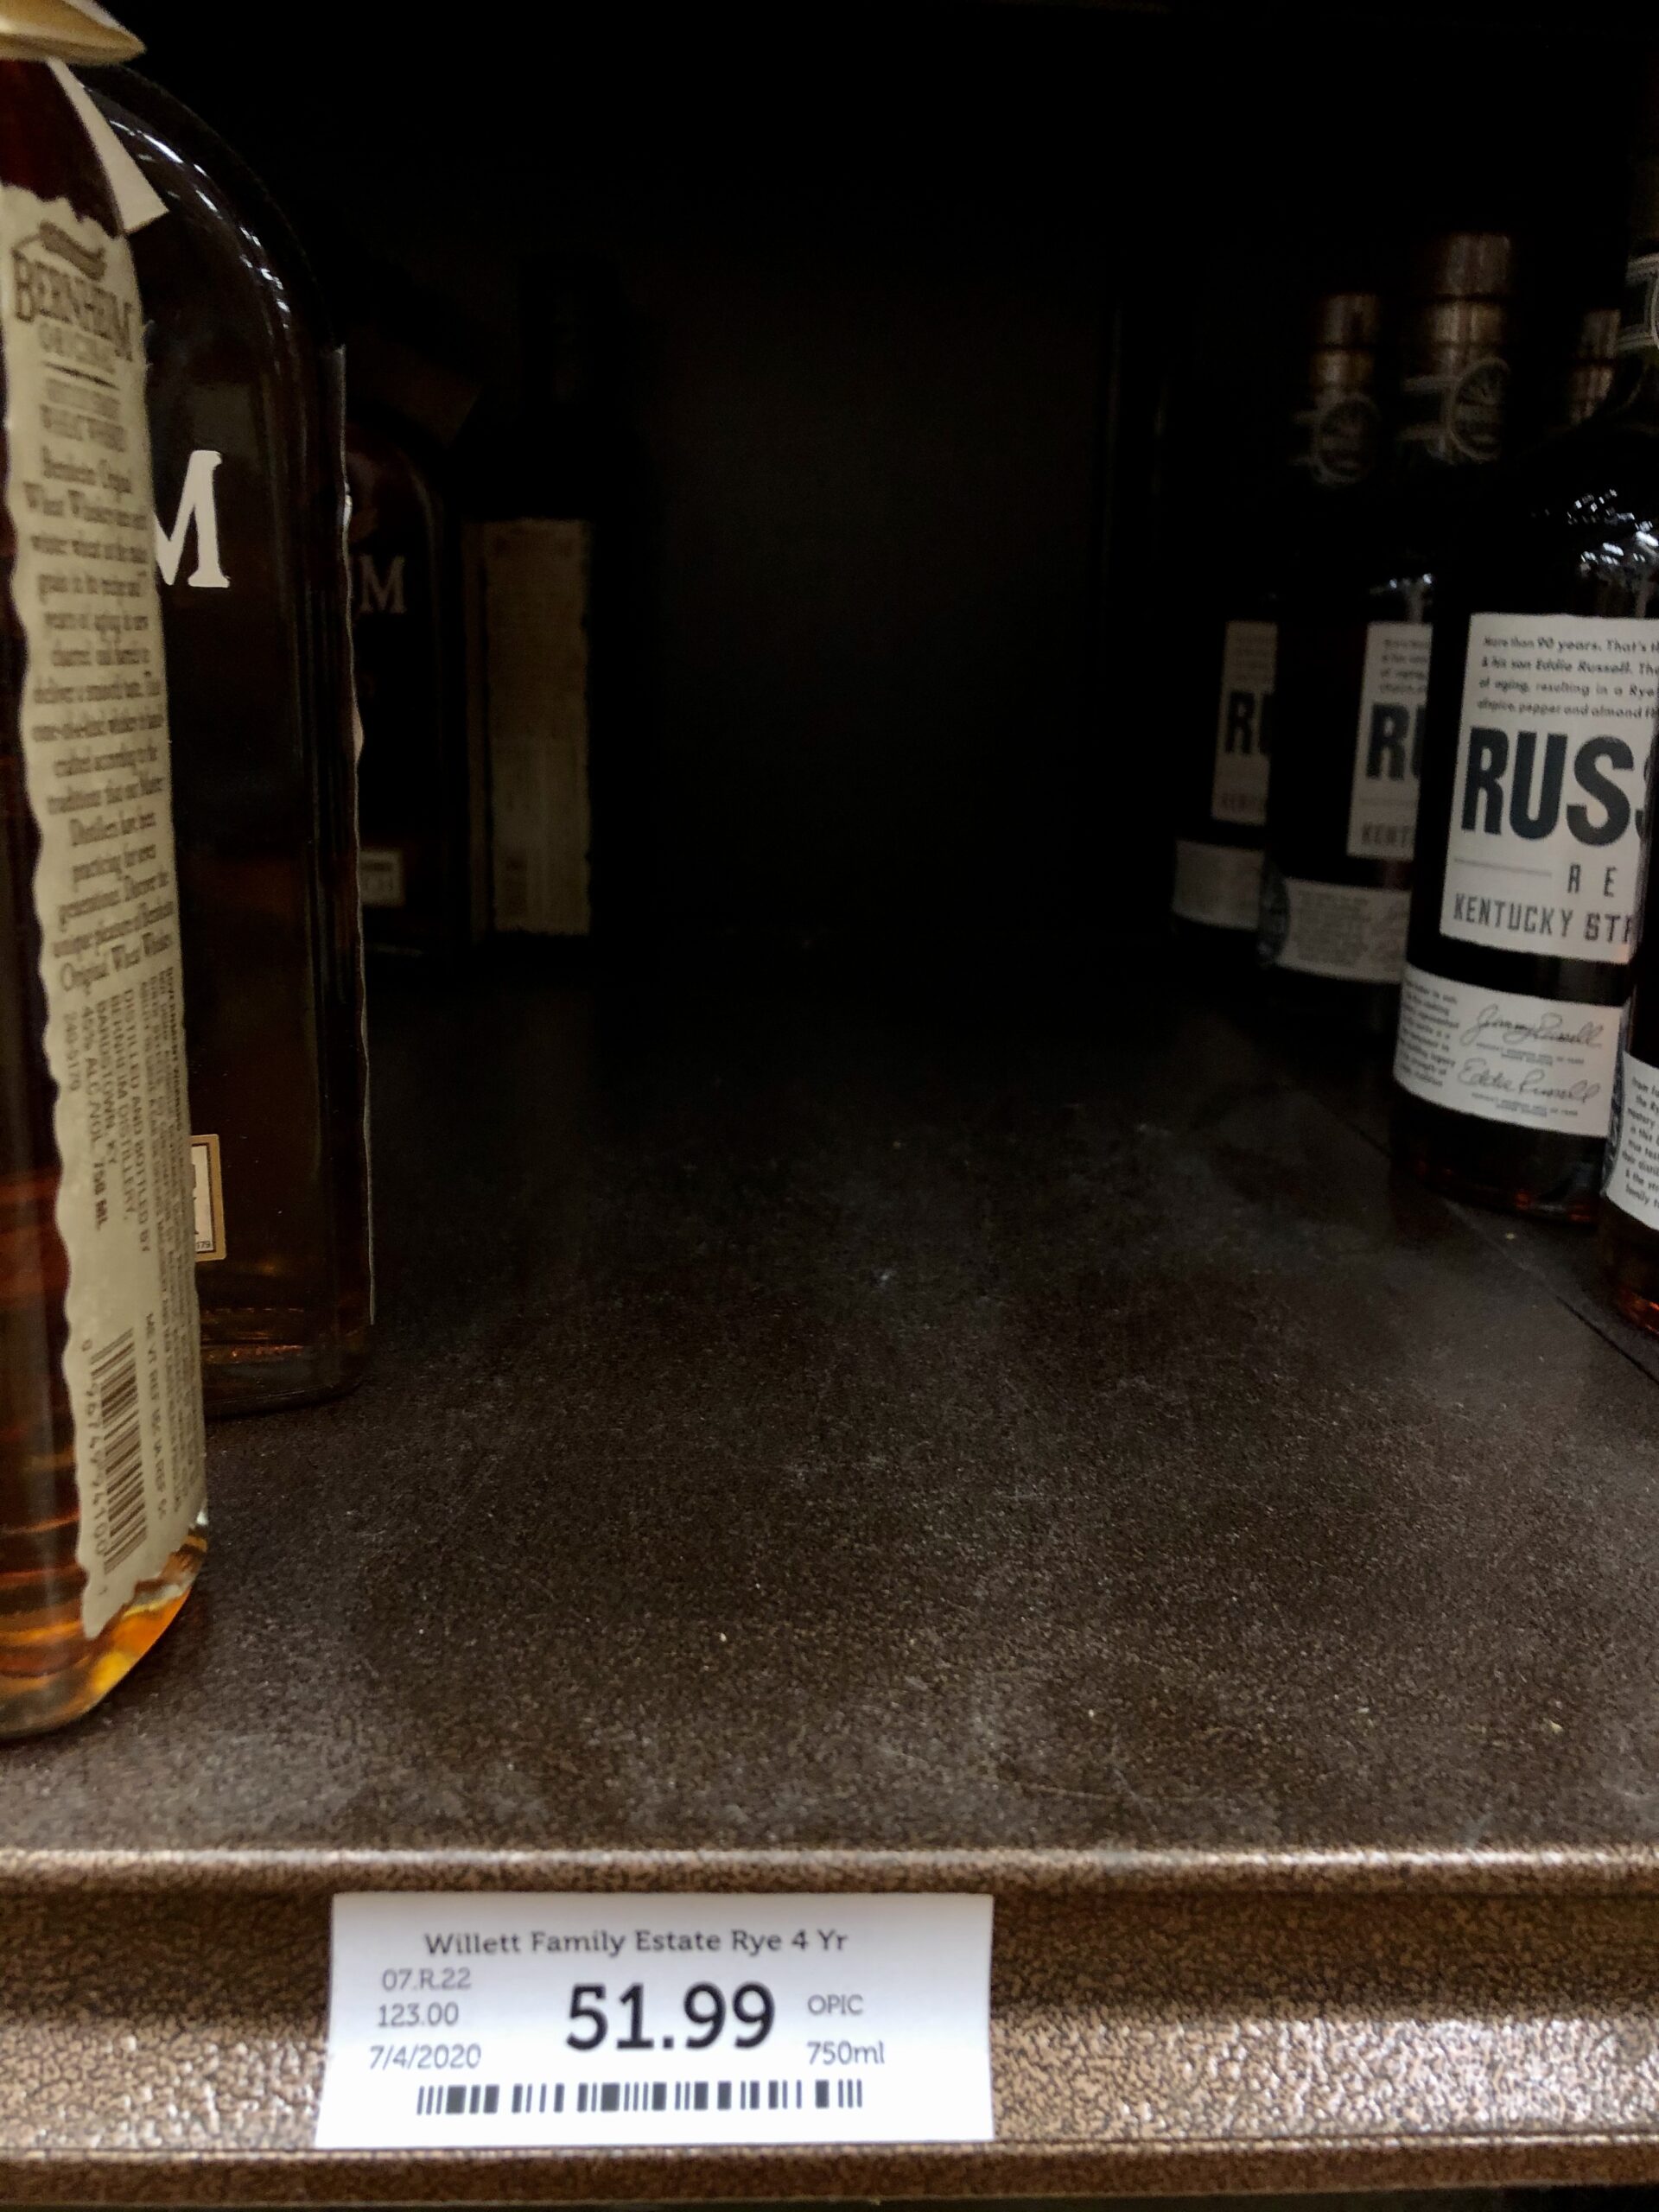 Dear Whiskey Hunters:  An Appeal to Buyers of Hard to Find Whiskey